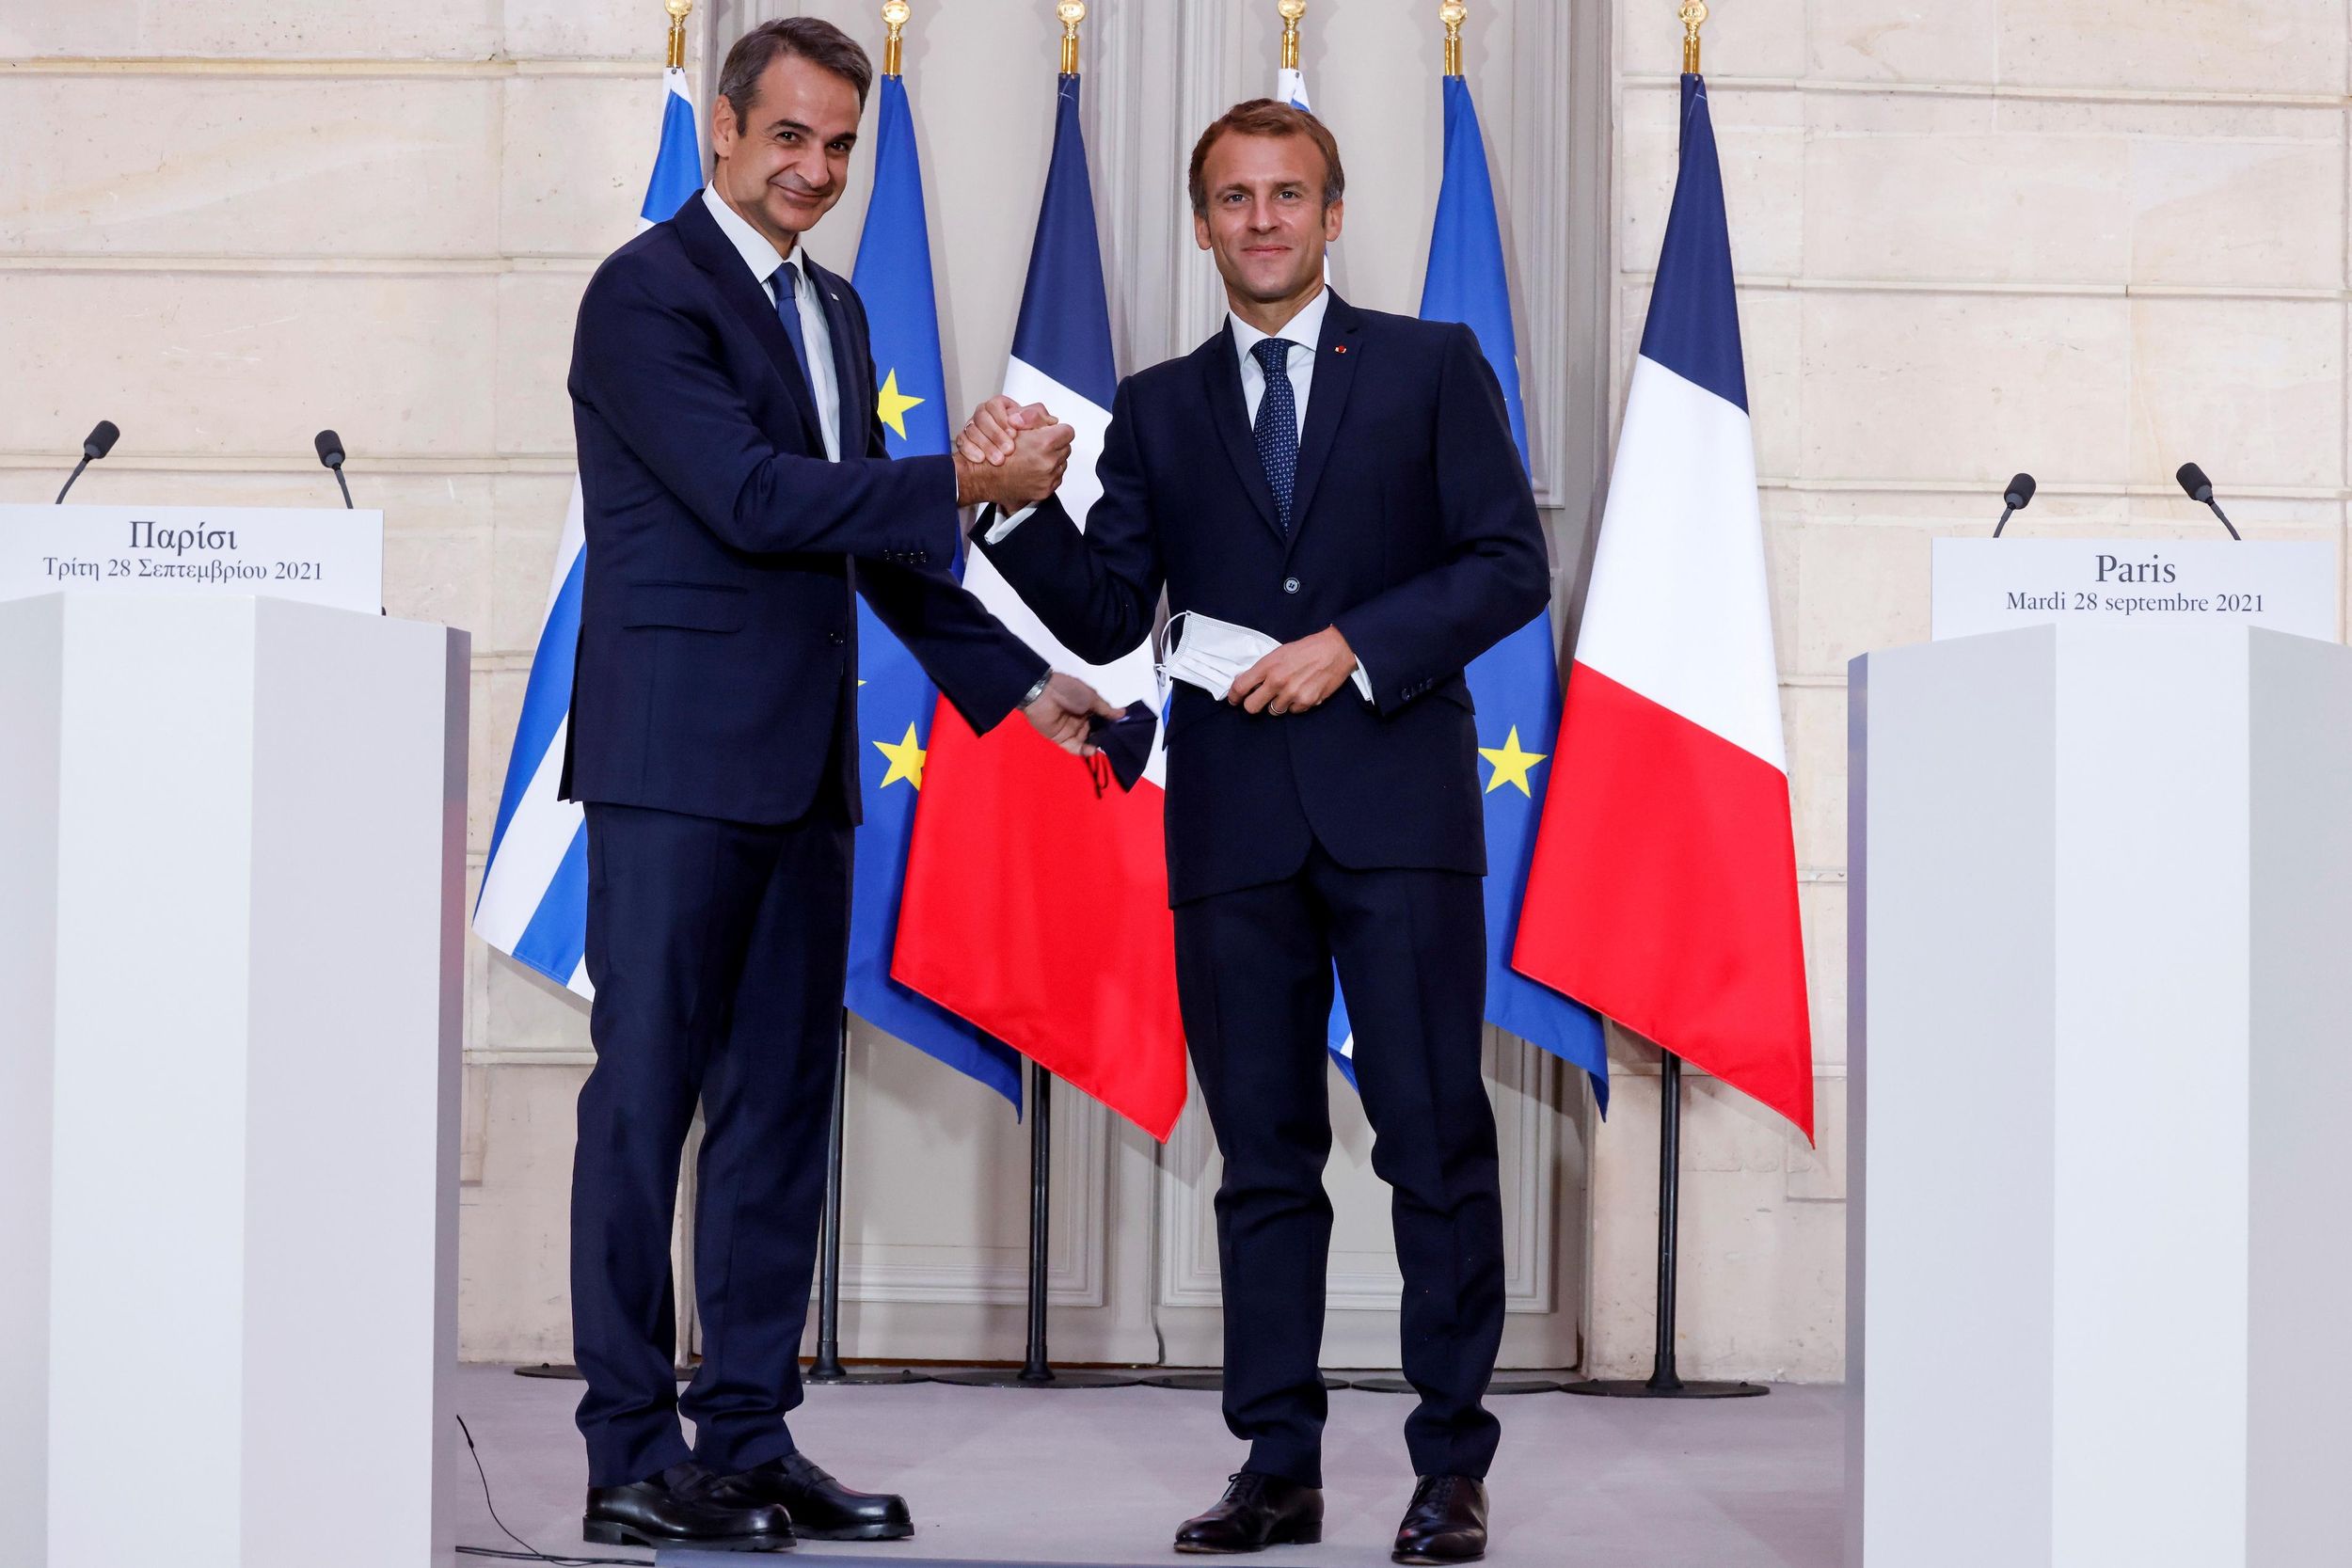 Greek Prime Minister Kyriakos Mitsotakis speaks as French President Emmanuel Macron listens on during a signing ceremony of a new defence deal at The Elysee Palace in Paris, France September 28, 2021. 